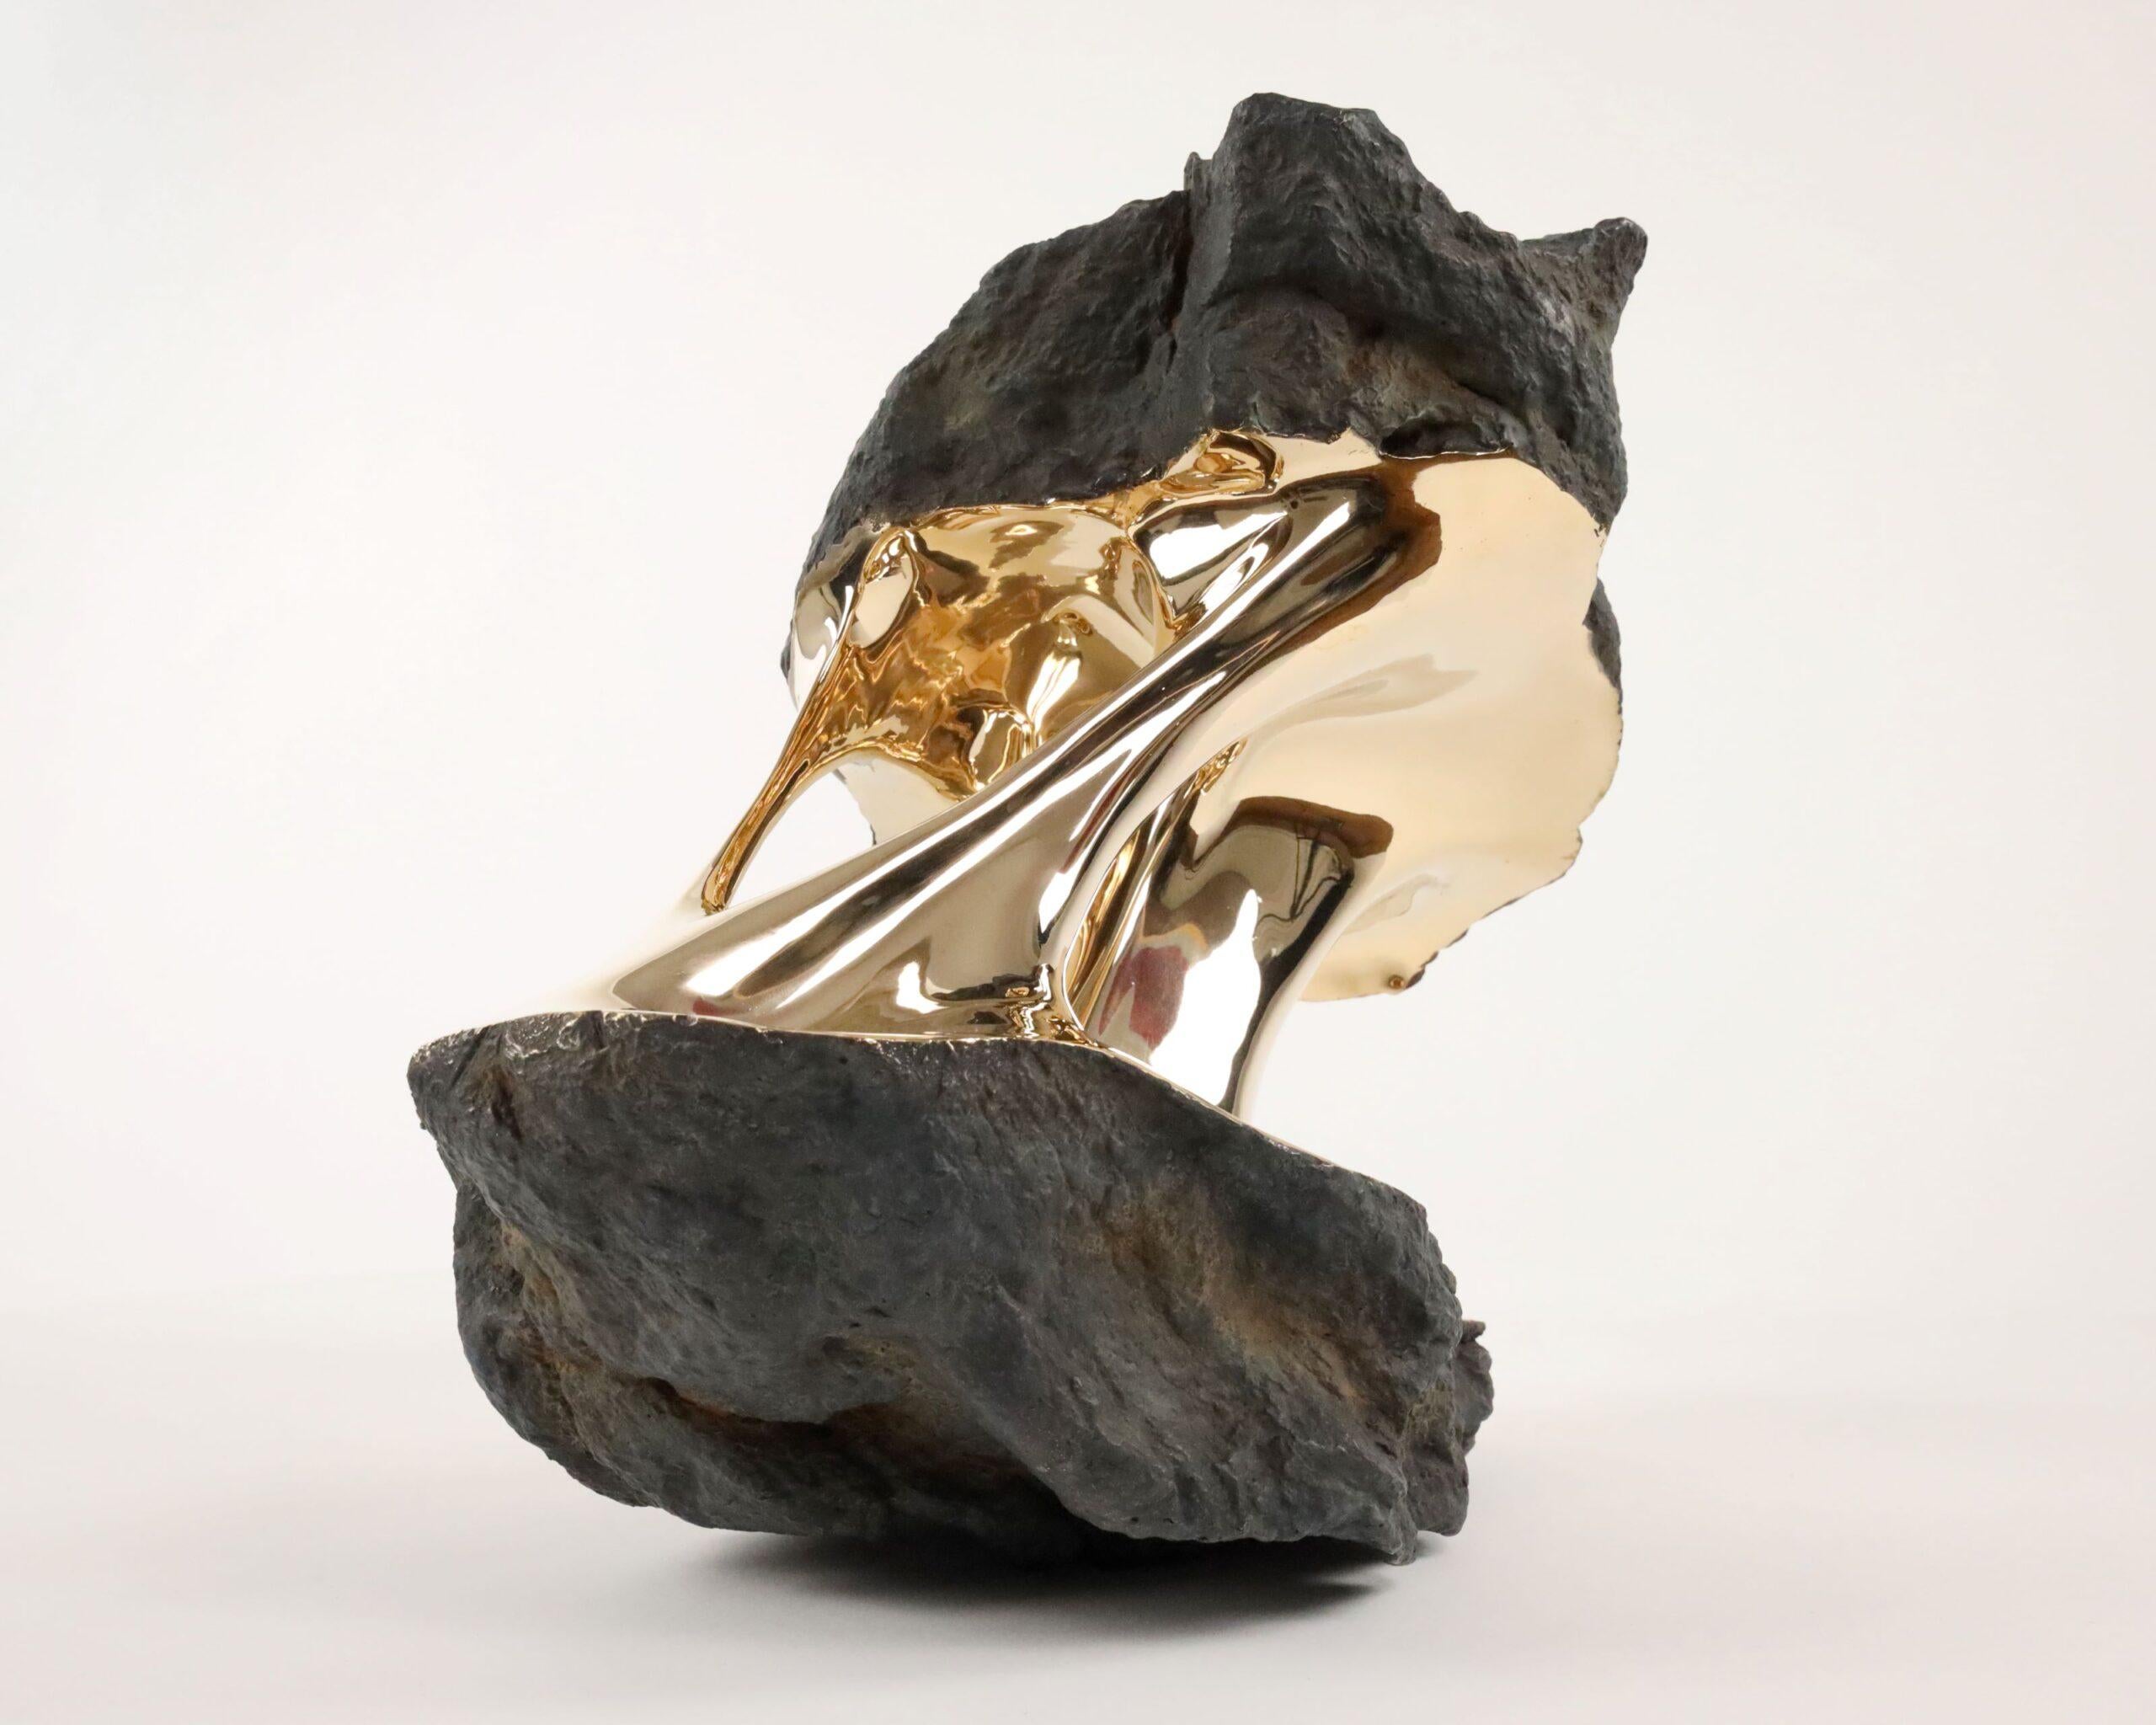 Alchemy by Romain Langlois - Rock-like bronze sculpture, golden, abstract For Sale 5